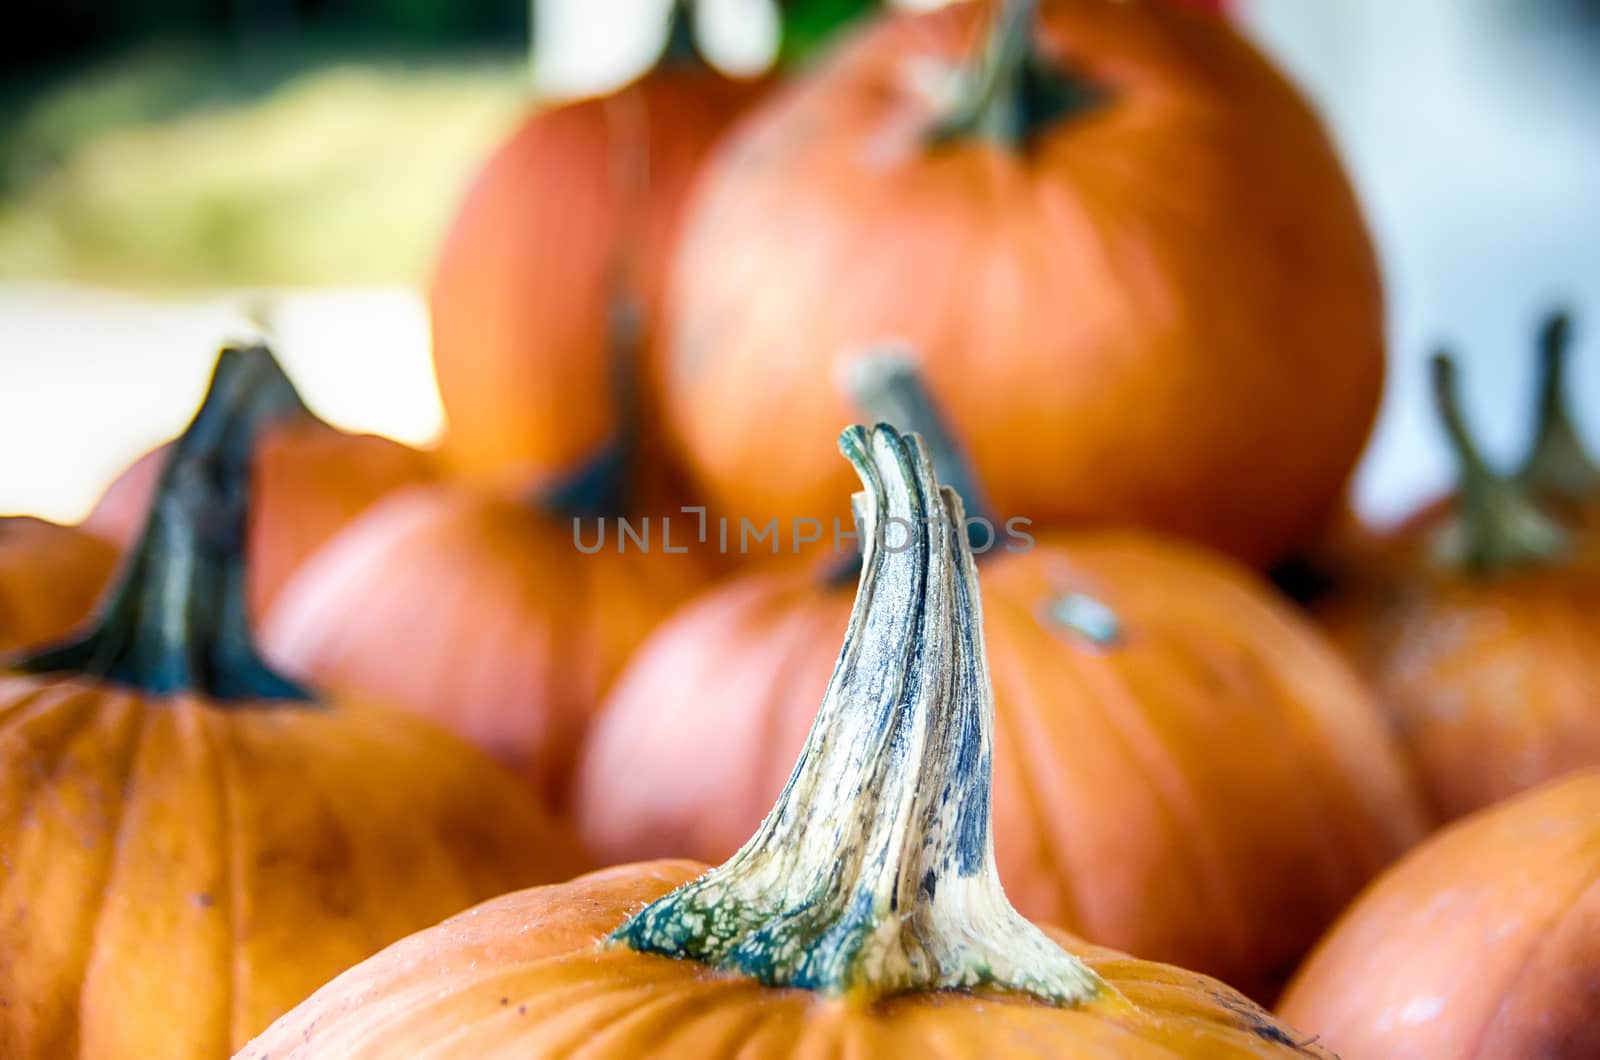 Pumpkins in the wooden box preparing for sale by digidreamgrafix